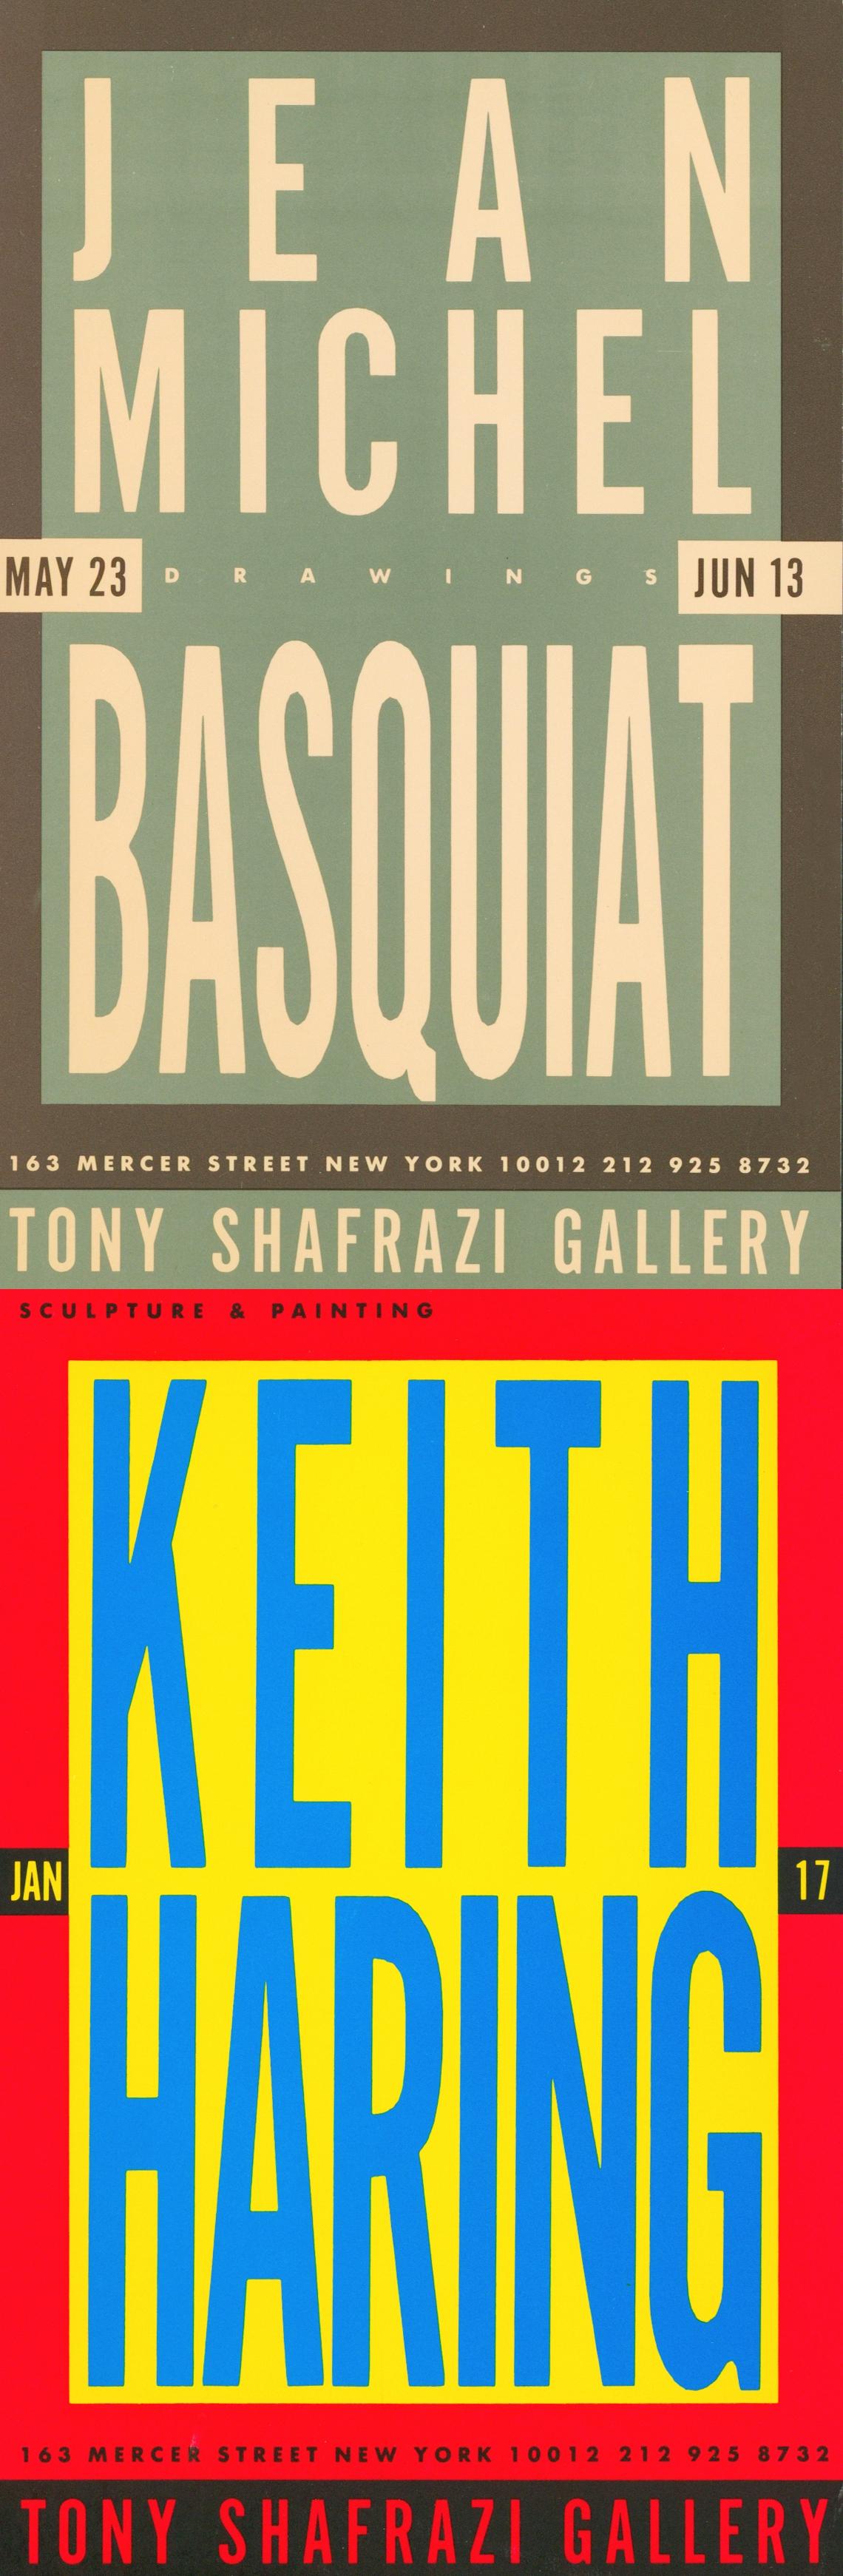 Basquiat Keith Haring at Tony Shafrazi Gallery 1987 (vintage Basquiat Haring)  - Pop Art Print by after Jean-Michel Basquiat